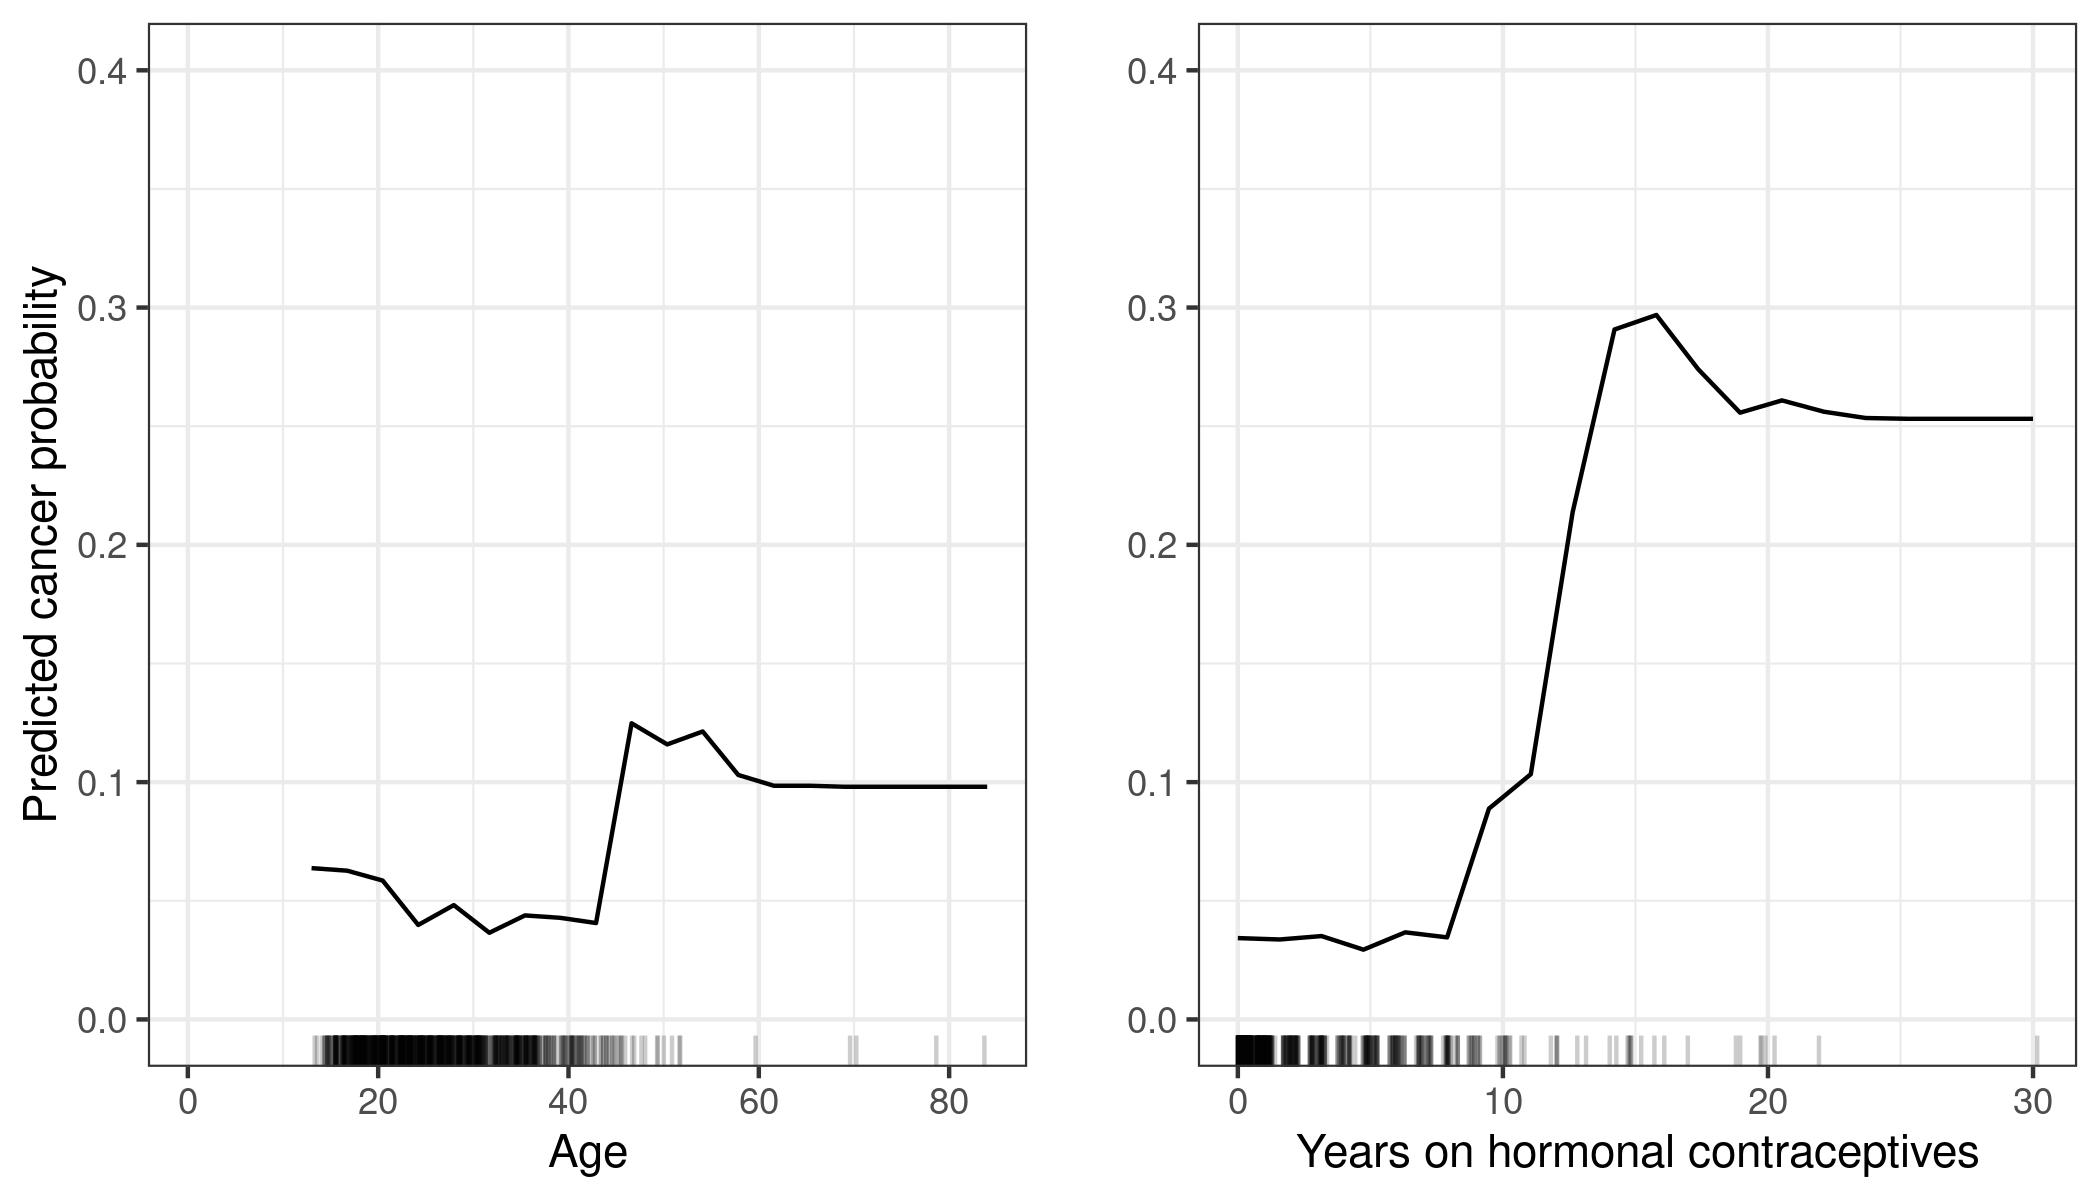 PDPs of cancer probability based on age and years with hormonal contraceptives. For age, the PDP shows that the probability is low until 40 and increases after. The more years on hormonal contraceptives the higher the predicted cancer risk, especially after 10 years. For both features not many data points with large values were available, so the PD estimates are less reliable in those regions.